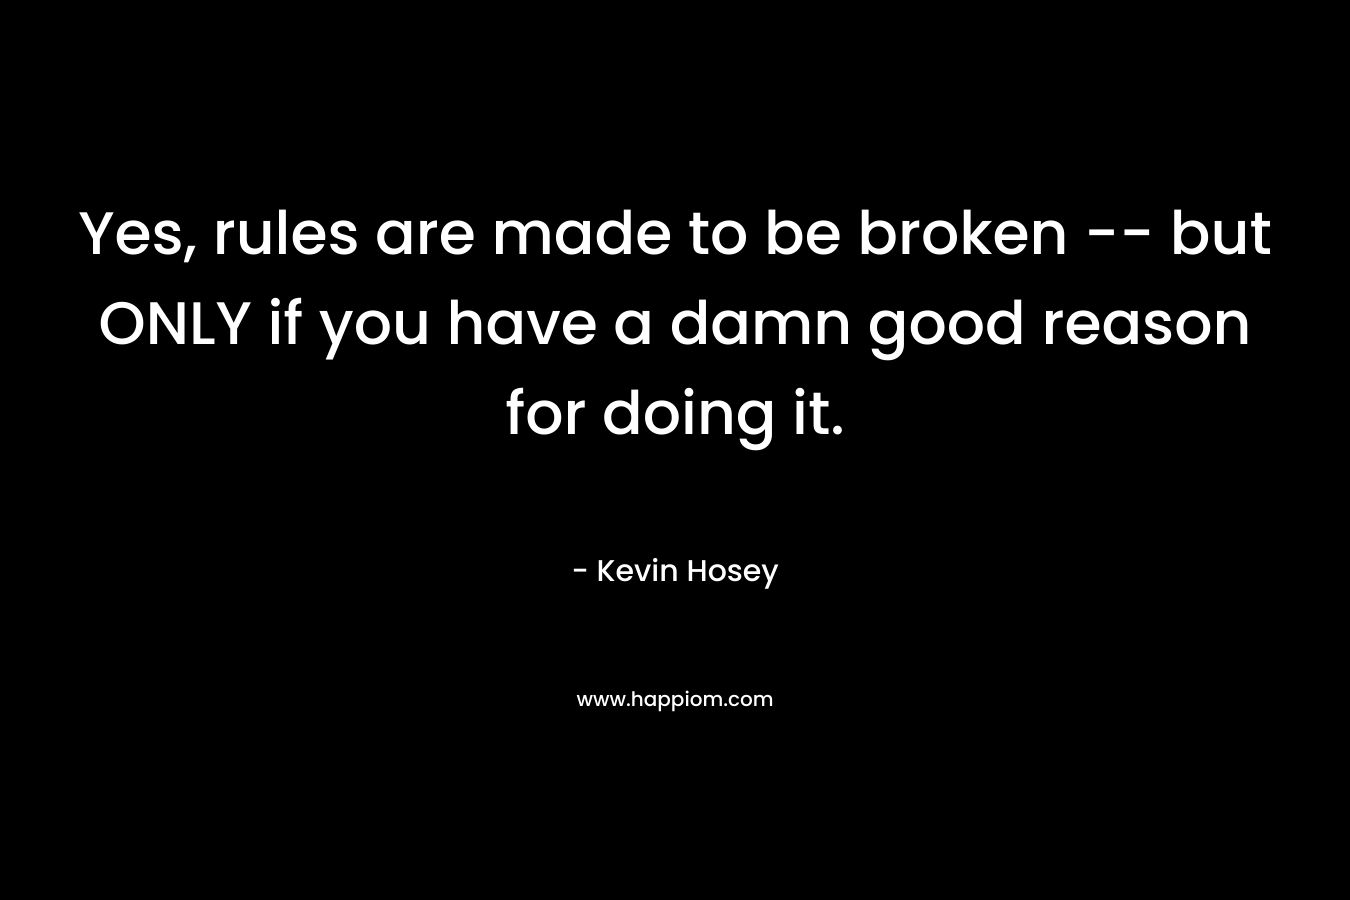 Yes, rules are made to be broken — but ONLY if you have a damn good reason for doing it. – Kevin Hosey